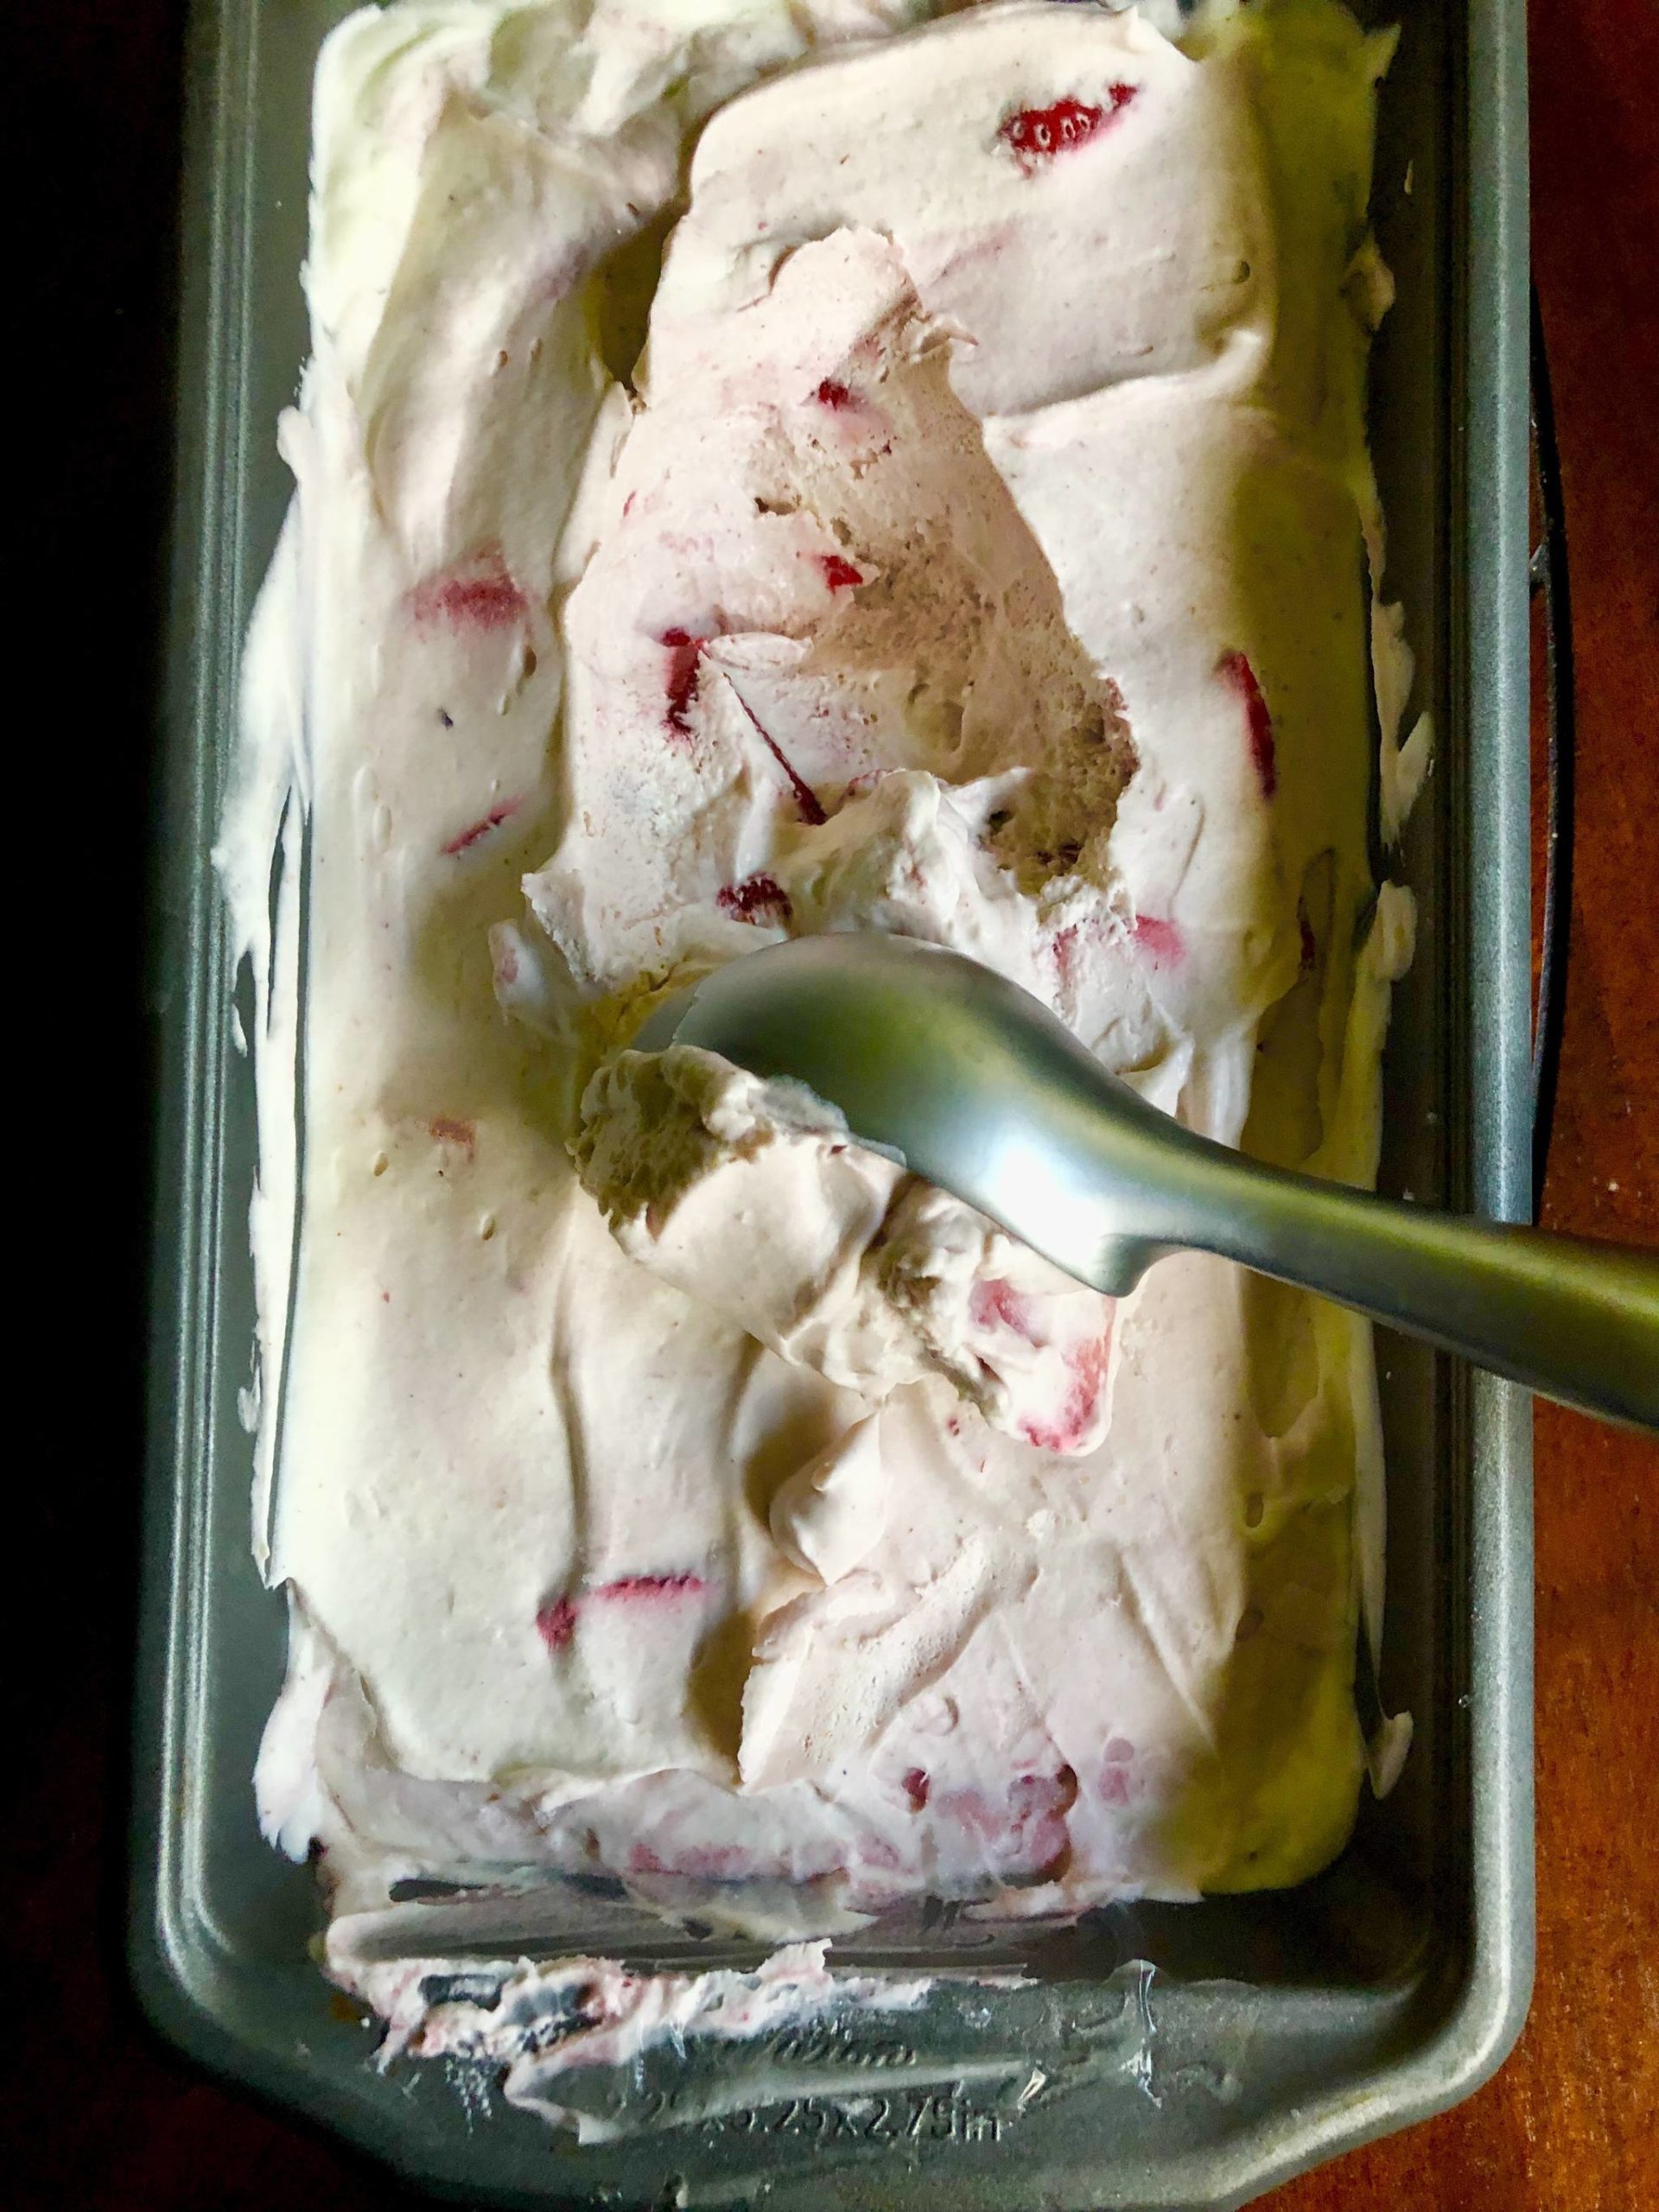 Rhubarb preserves in cardamom spiced ice cream are pictured in this Wednesday, June 10, 2020, in Anchorage, Alaska. (Photo by Victoria Petersen/Peninsula Clarion)